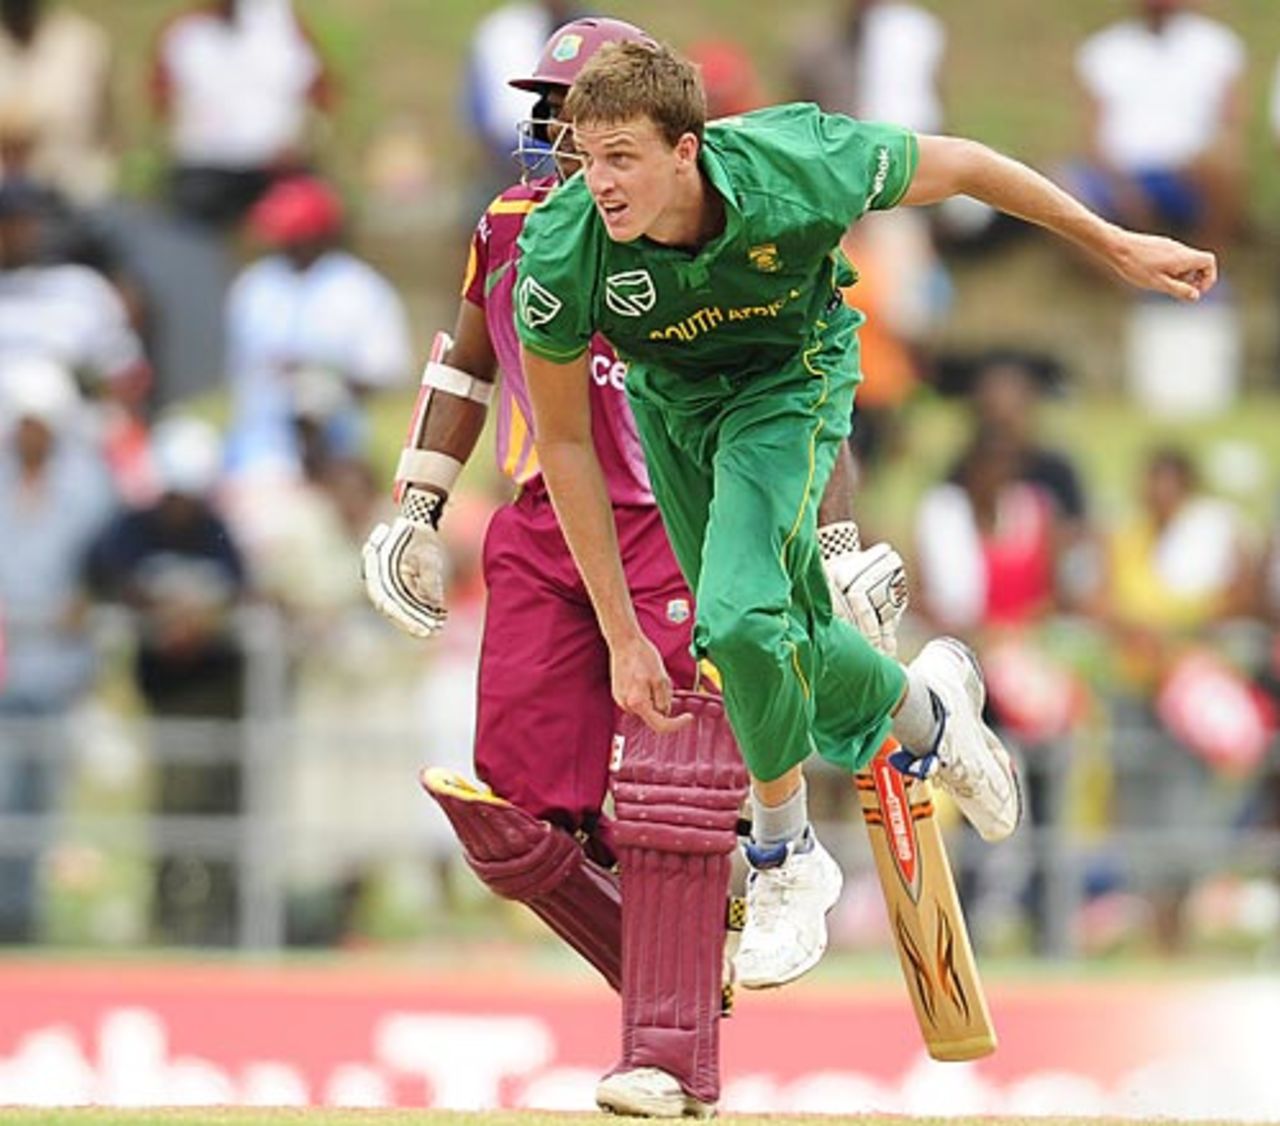 Morne Morkel picked up four wickets, West Indies v South Africa, 3rd ODI, Dominica, May 28, 2010